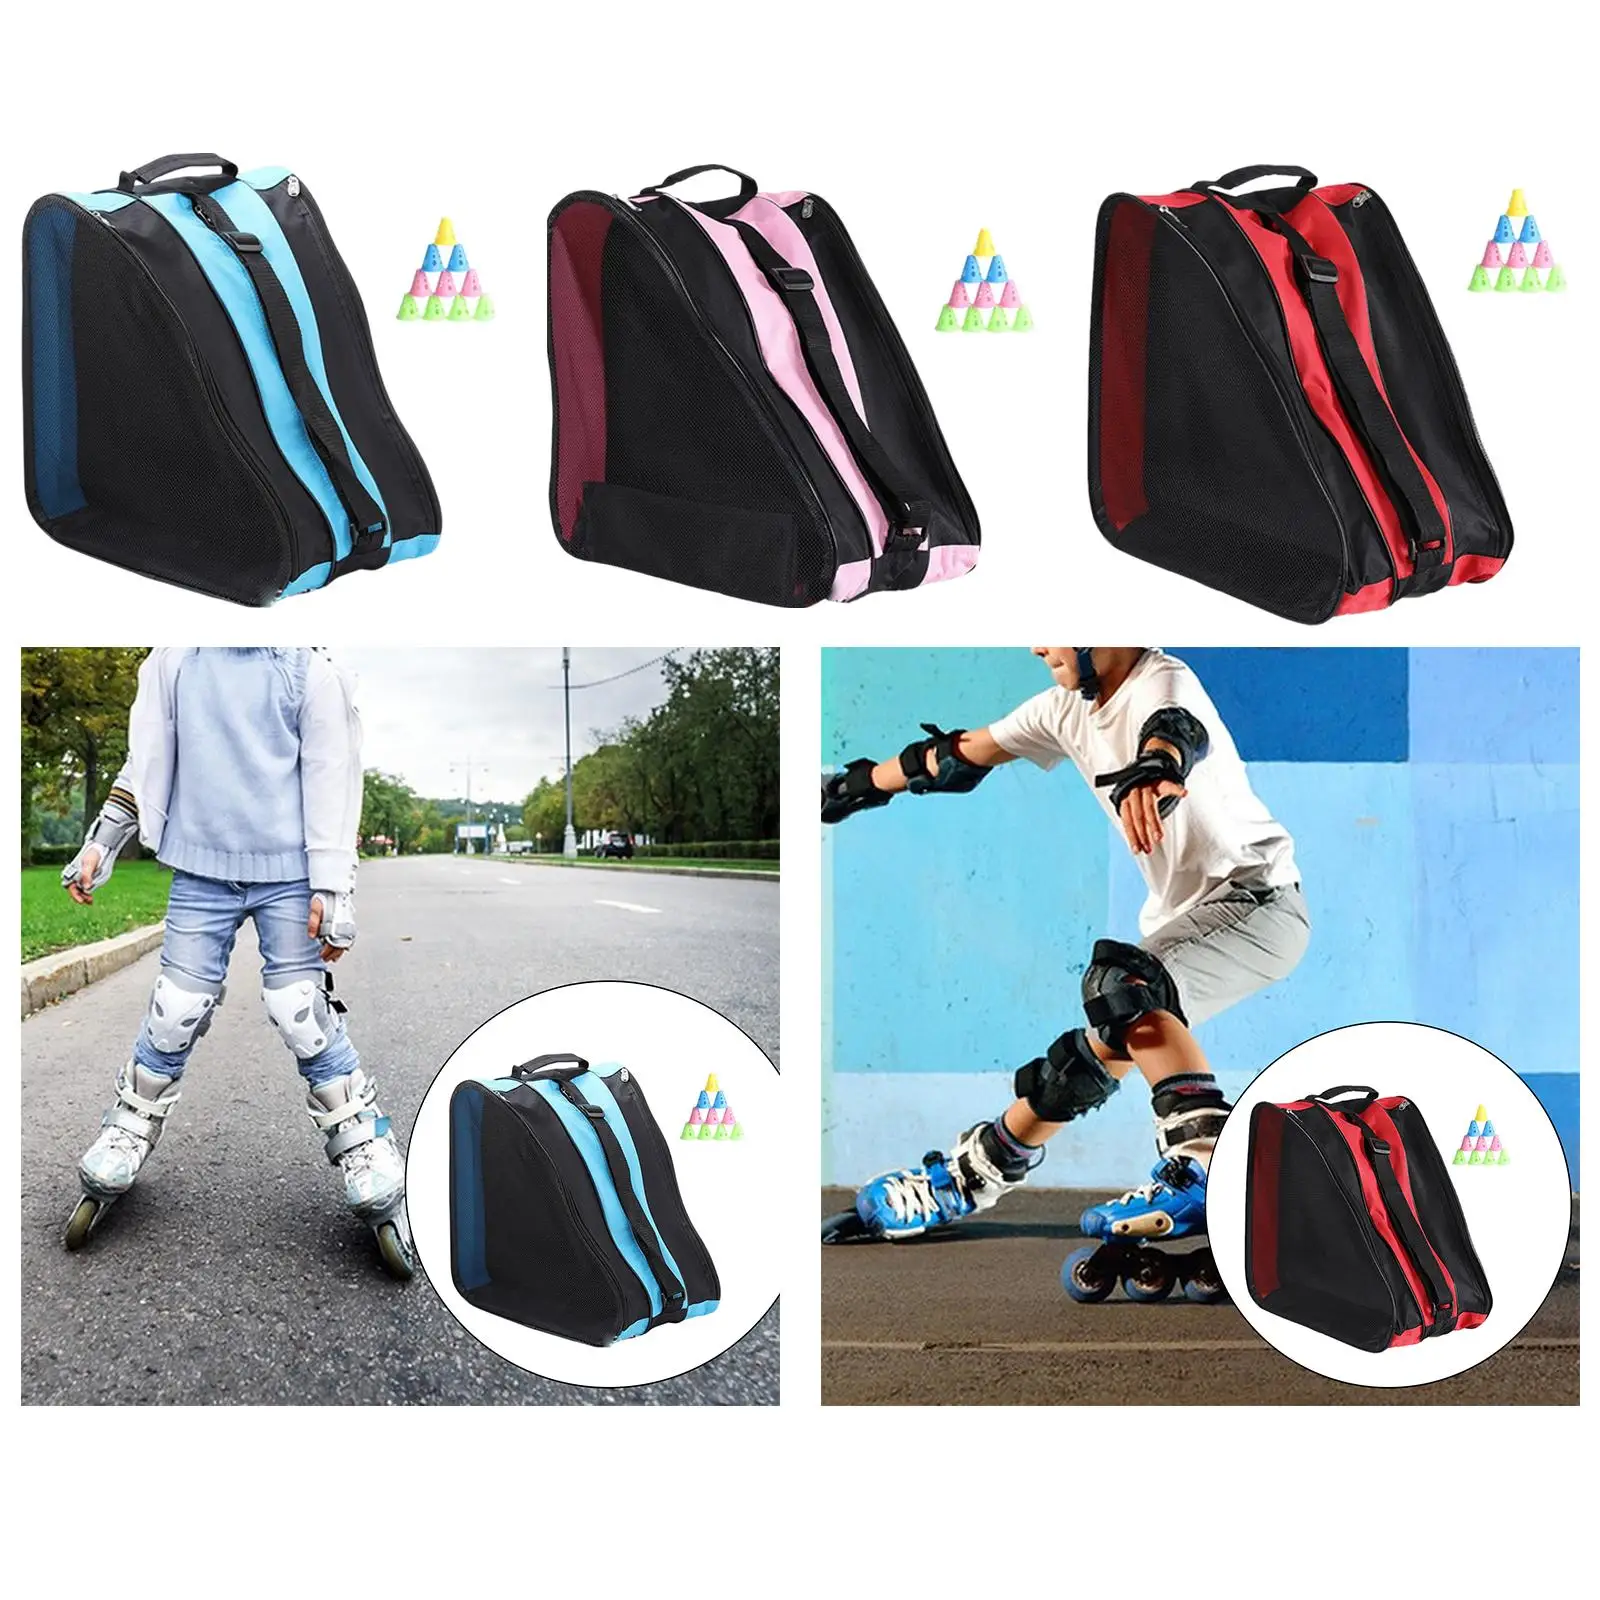 Durable Roller Skate Bags Breathable Ice Skate Bags with Adjistable Shoulder Strap and Top Handle, Inline Skate Bag for Boy Girl